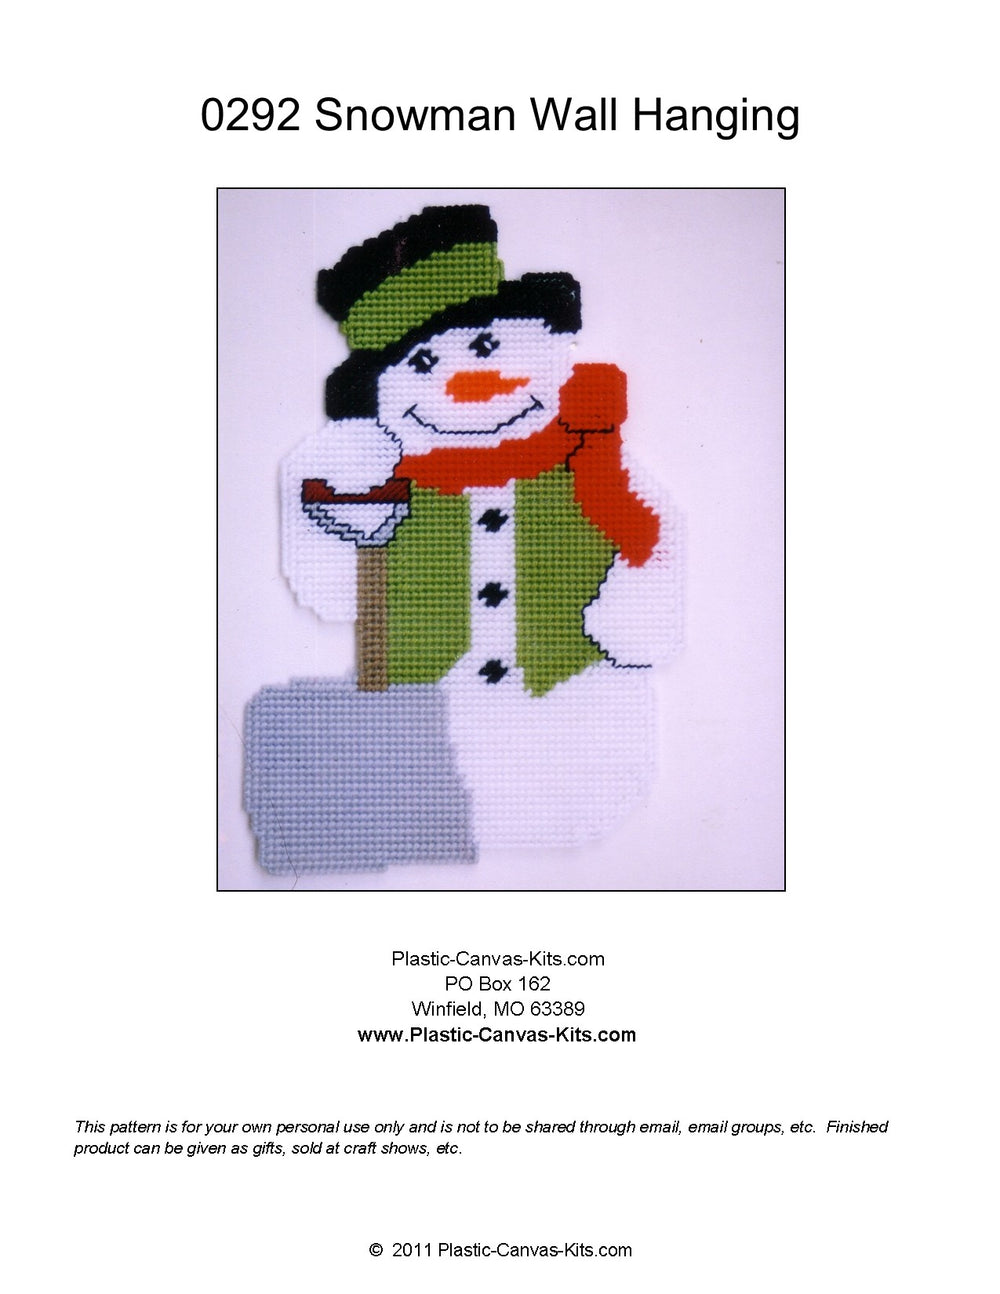 Snowman with Shovel  Wall Hanging